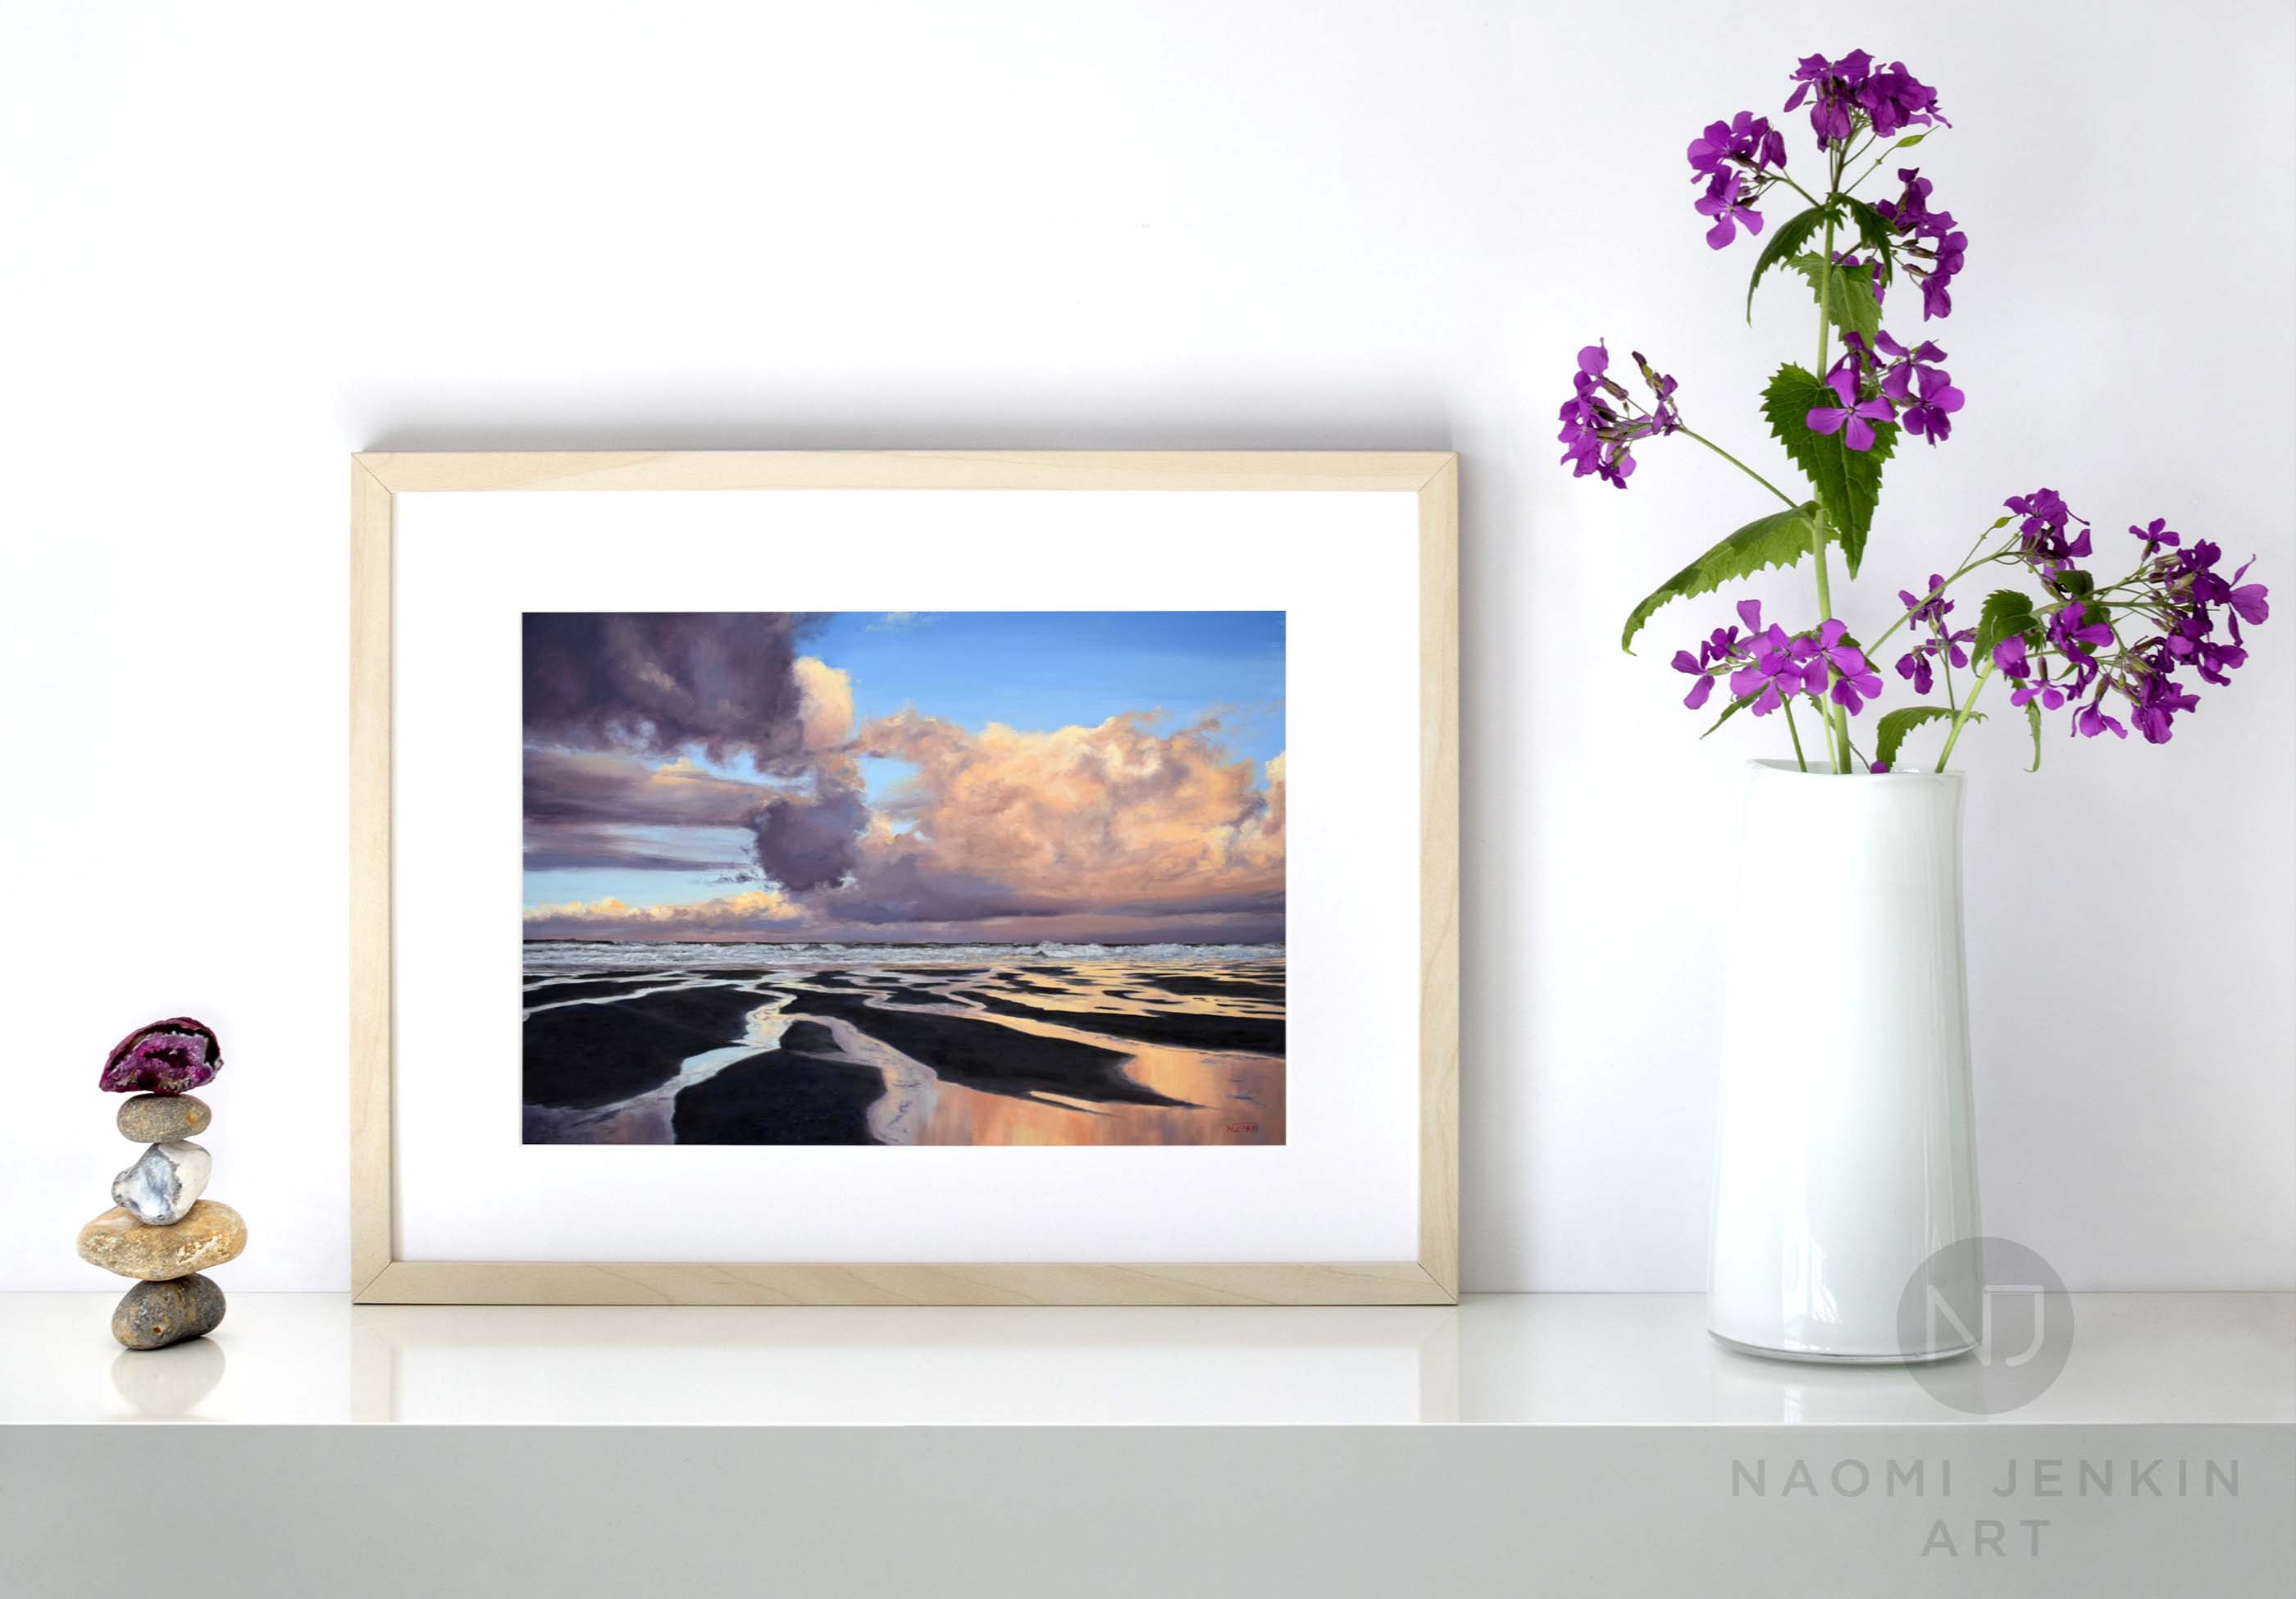 Limited edition fine art print of a seascape painting by Naomi Jenkin Art. 